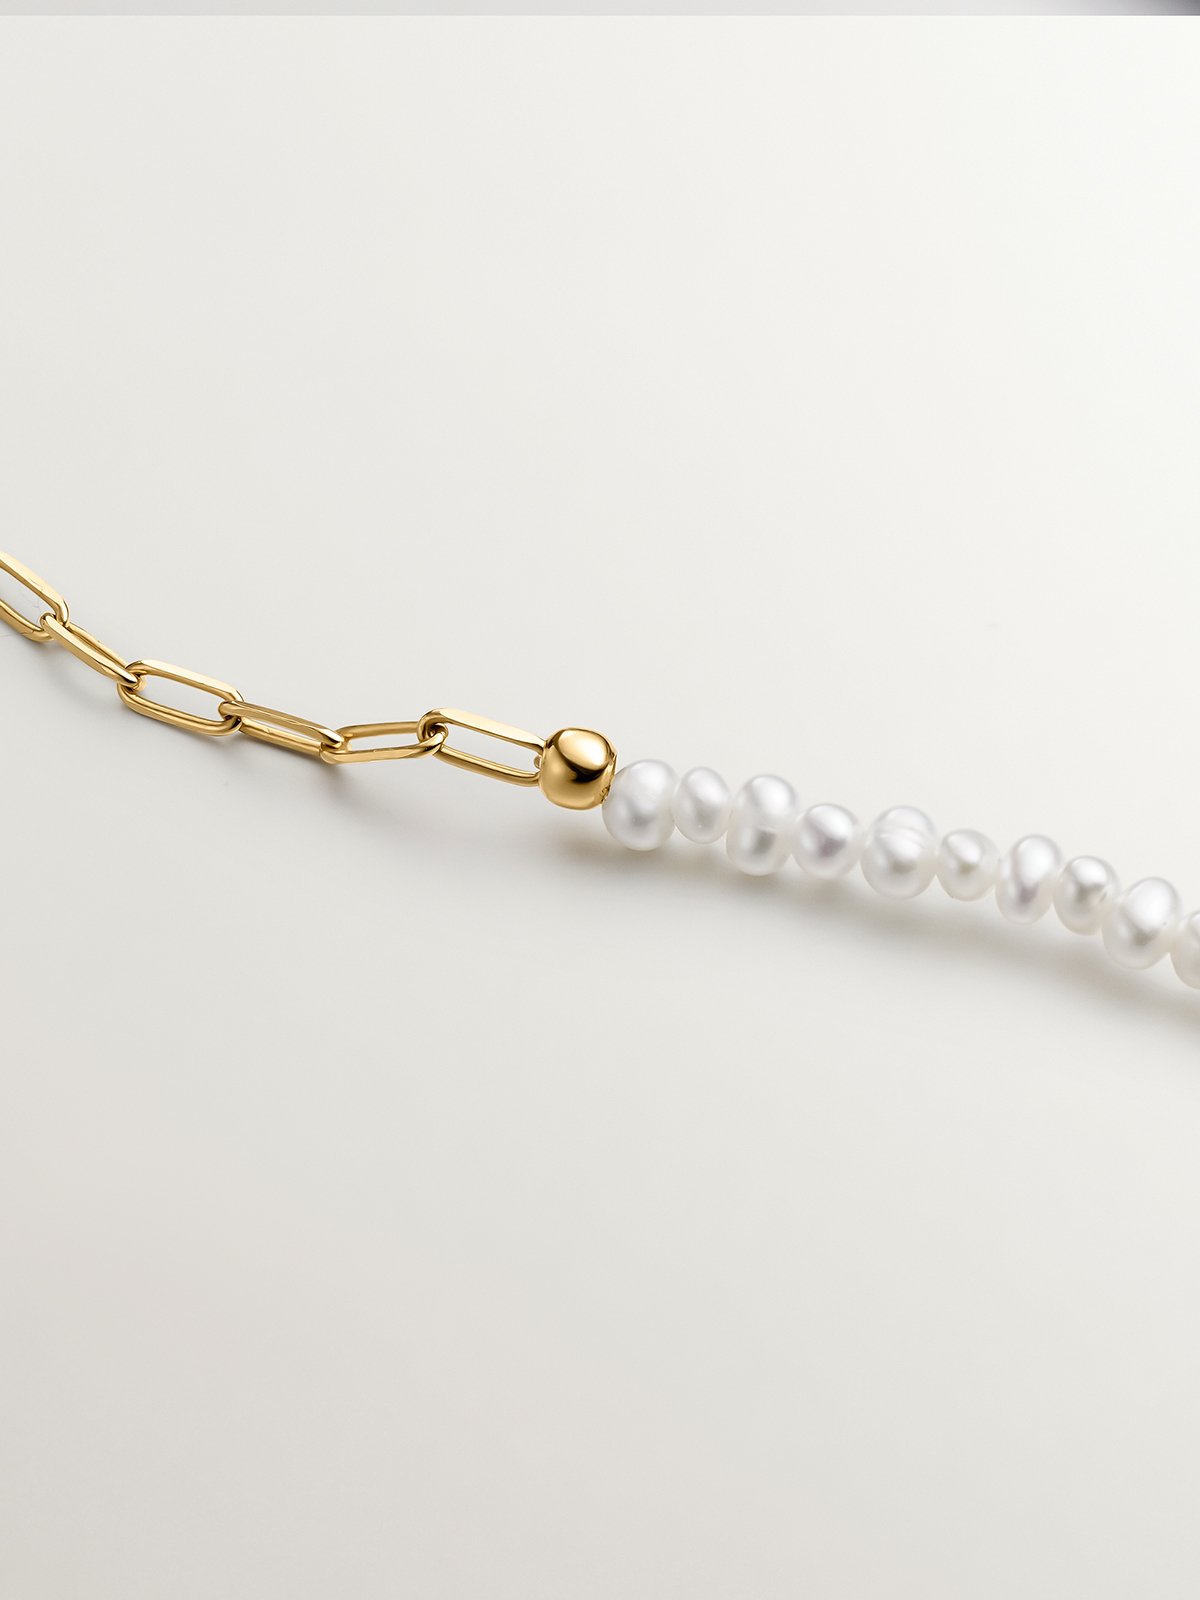 925 silver link bracelet in 18k yellow gold bathed